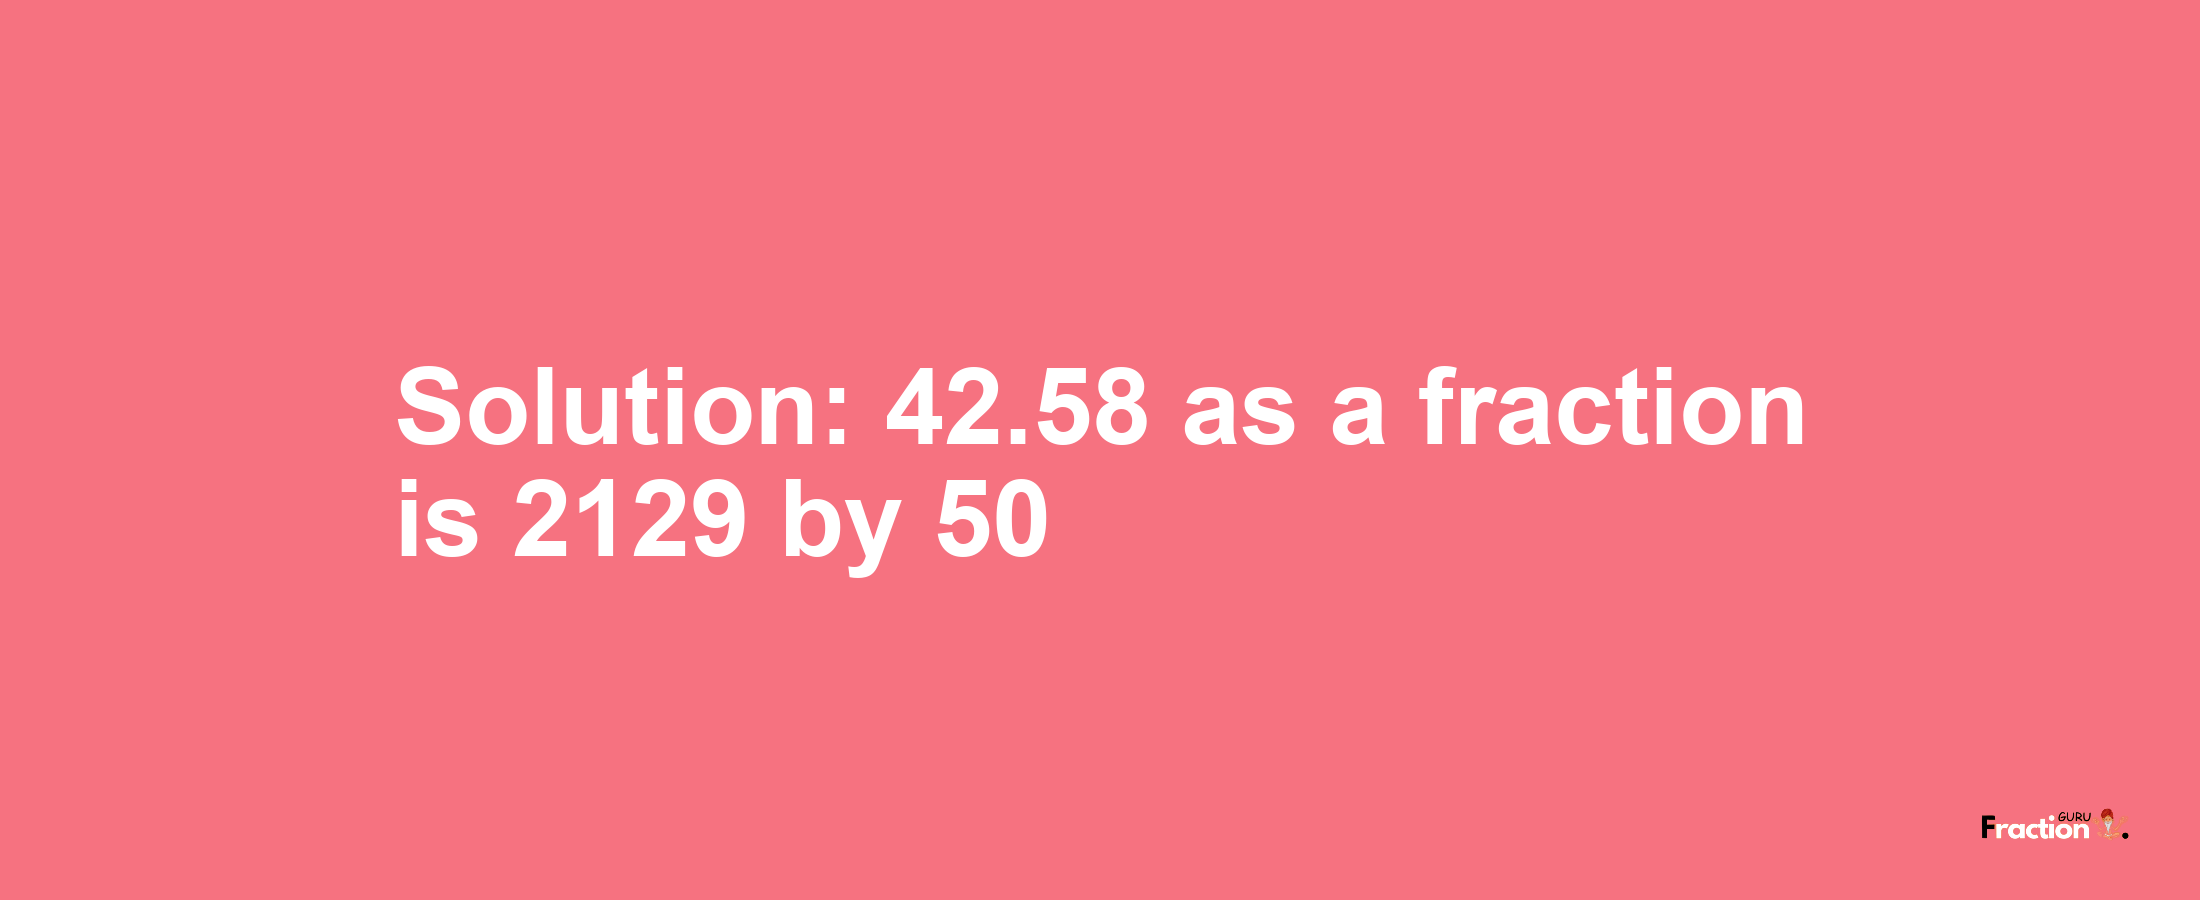 Solution:42.58 as a fraction is 2129/50